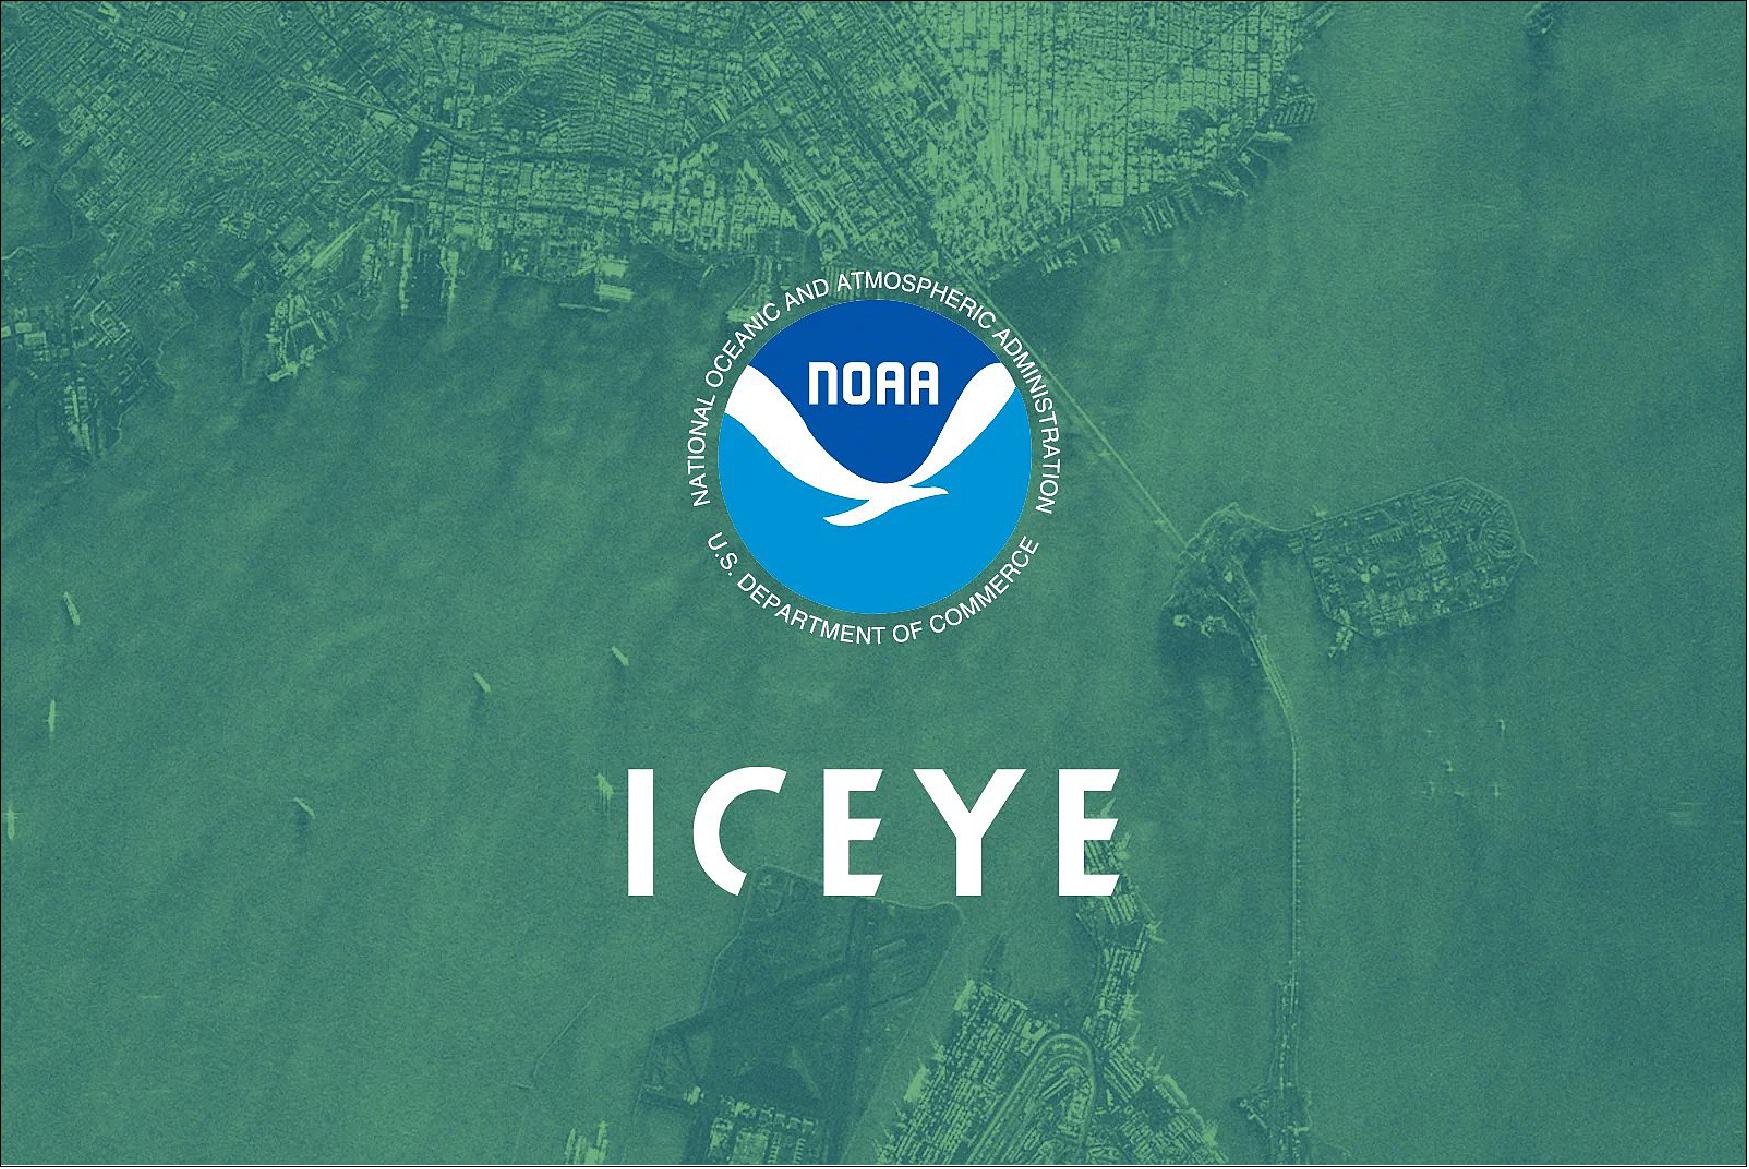 Figure 20: NOAA and ICEYE logos with ICEYE's radar satellite image of San-Francisco, CA, in the background (image credit: ICEYE)